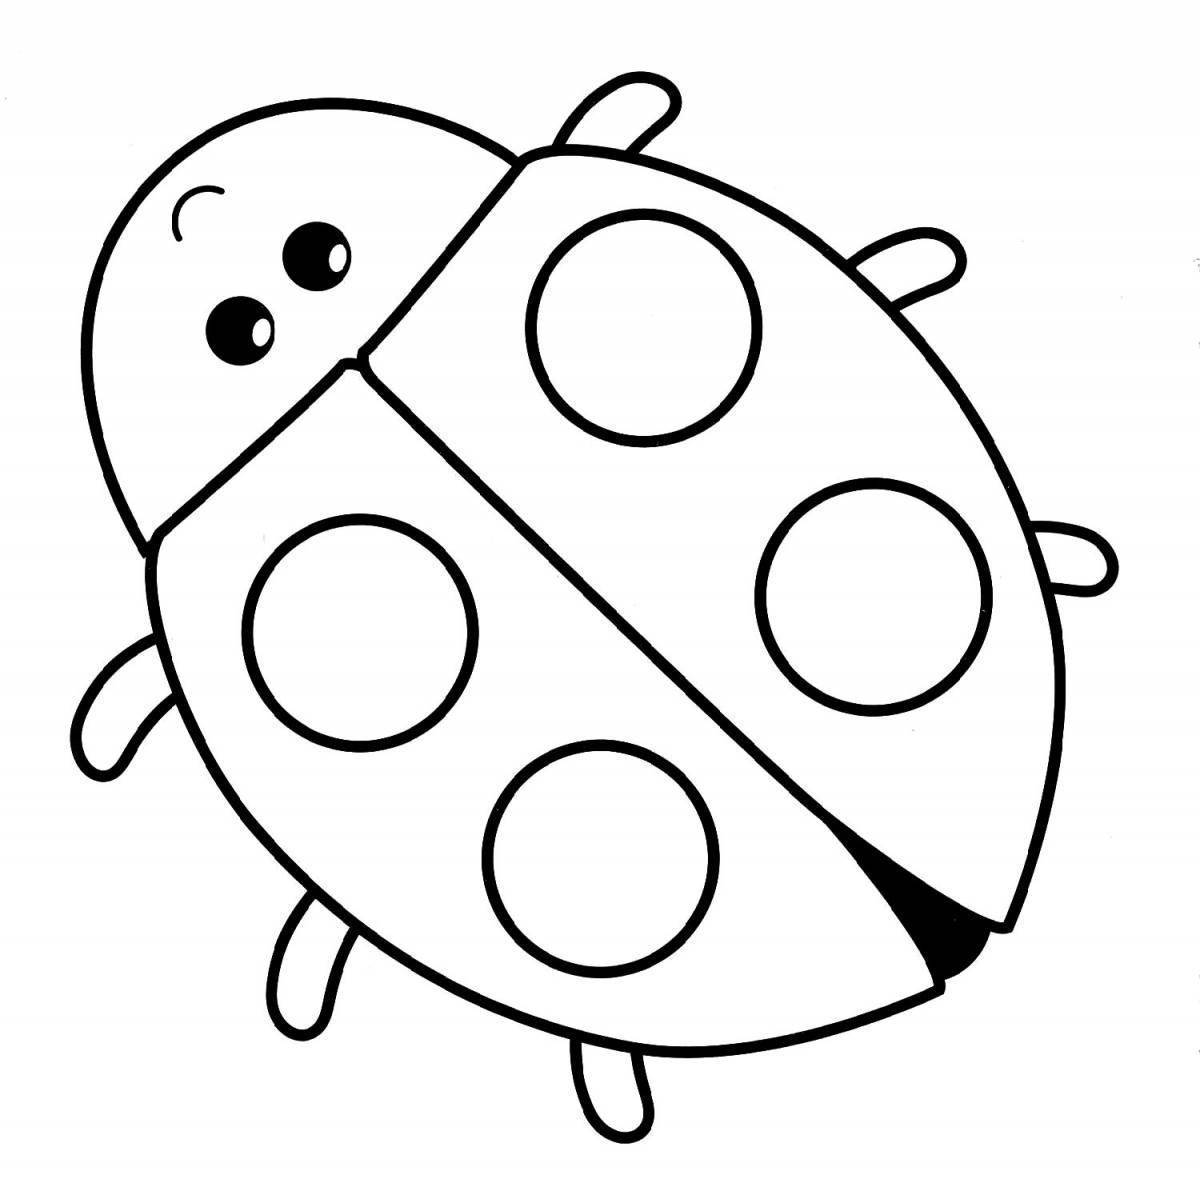 Color explosion ladybug coloring page